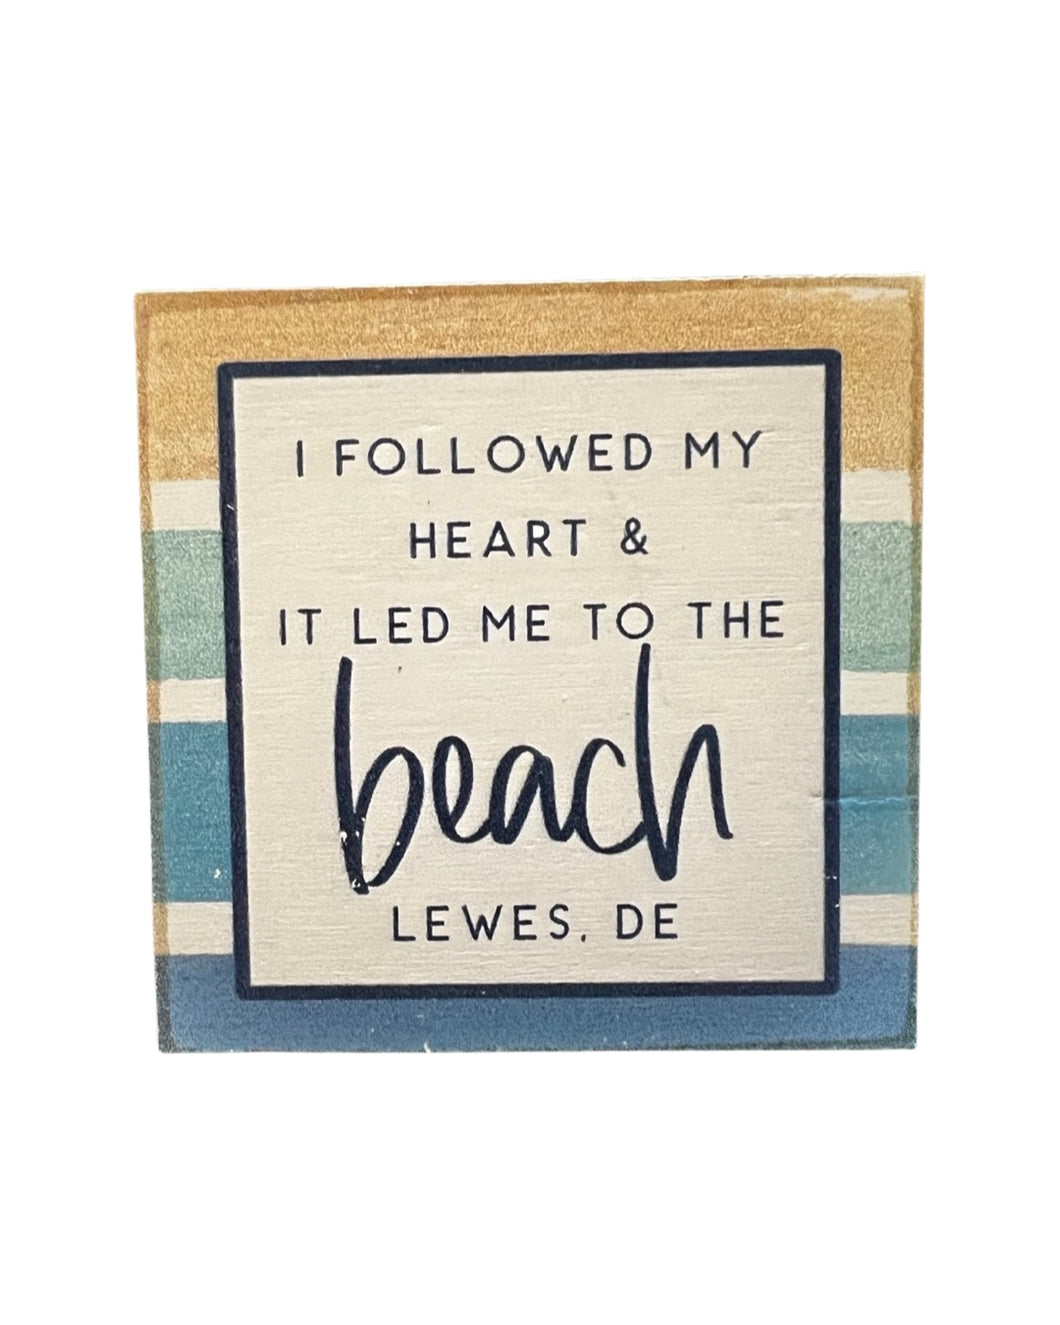 FOLLOWED MY HEART LEWES MAGNET